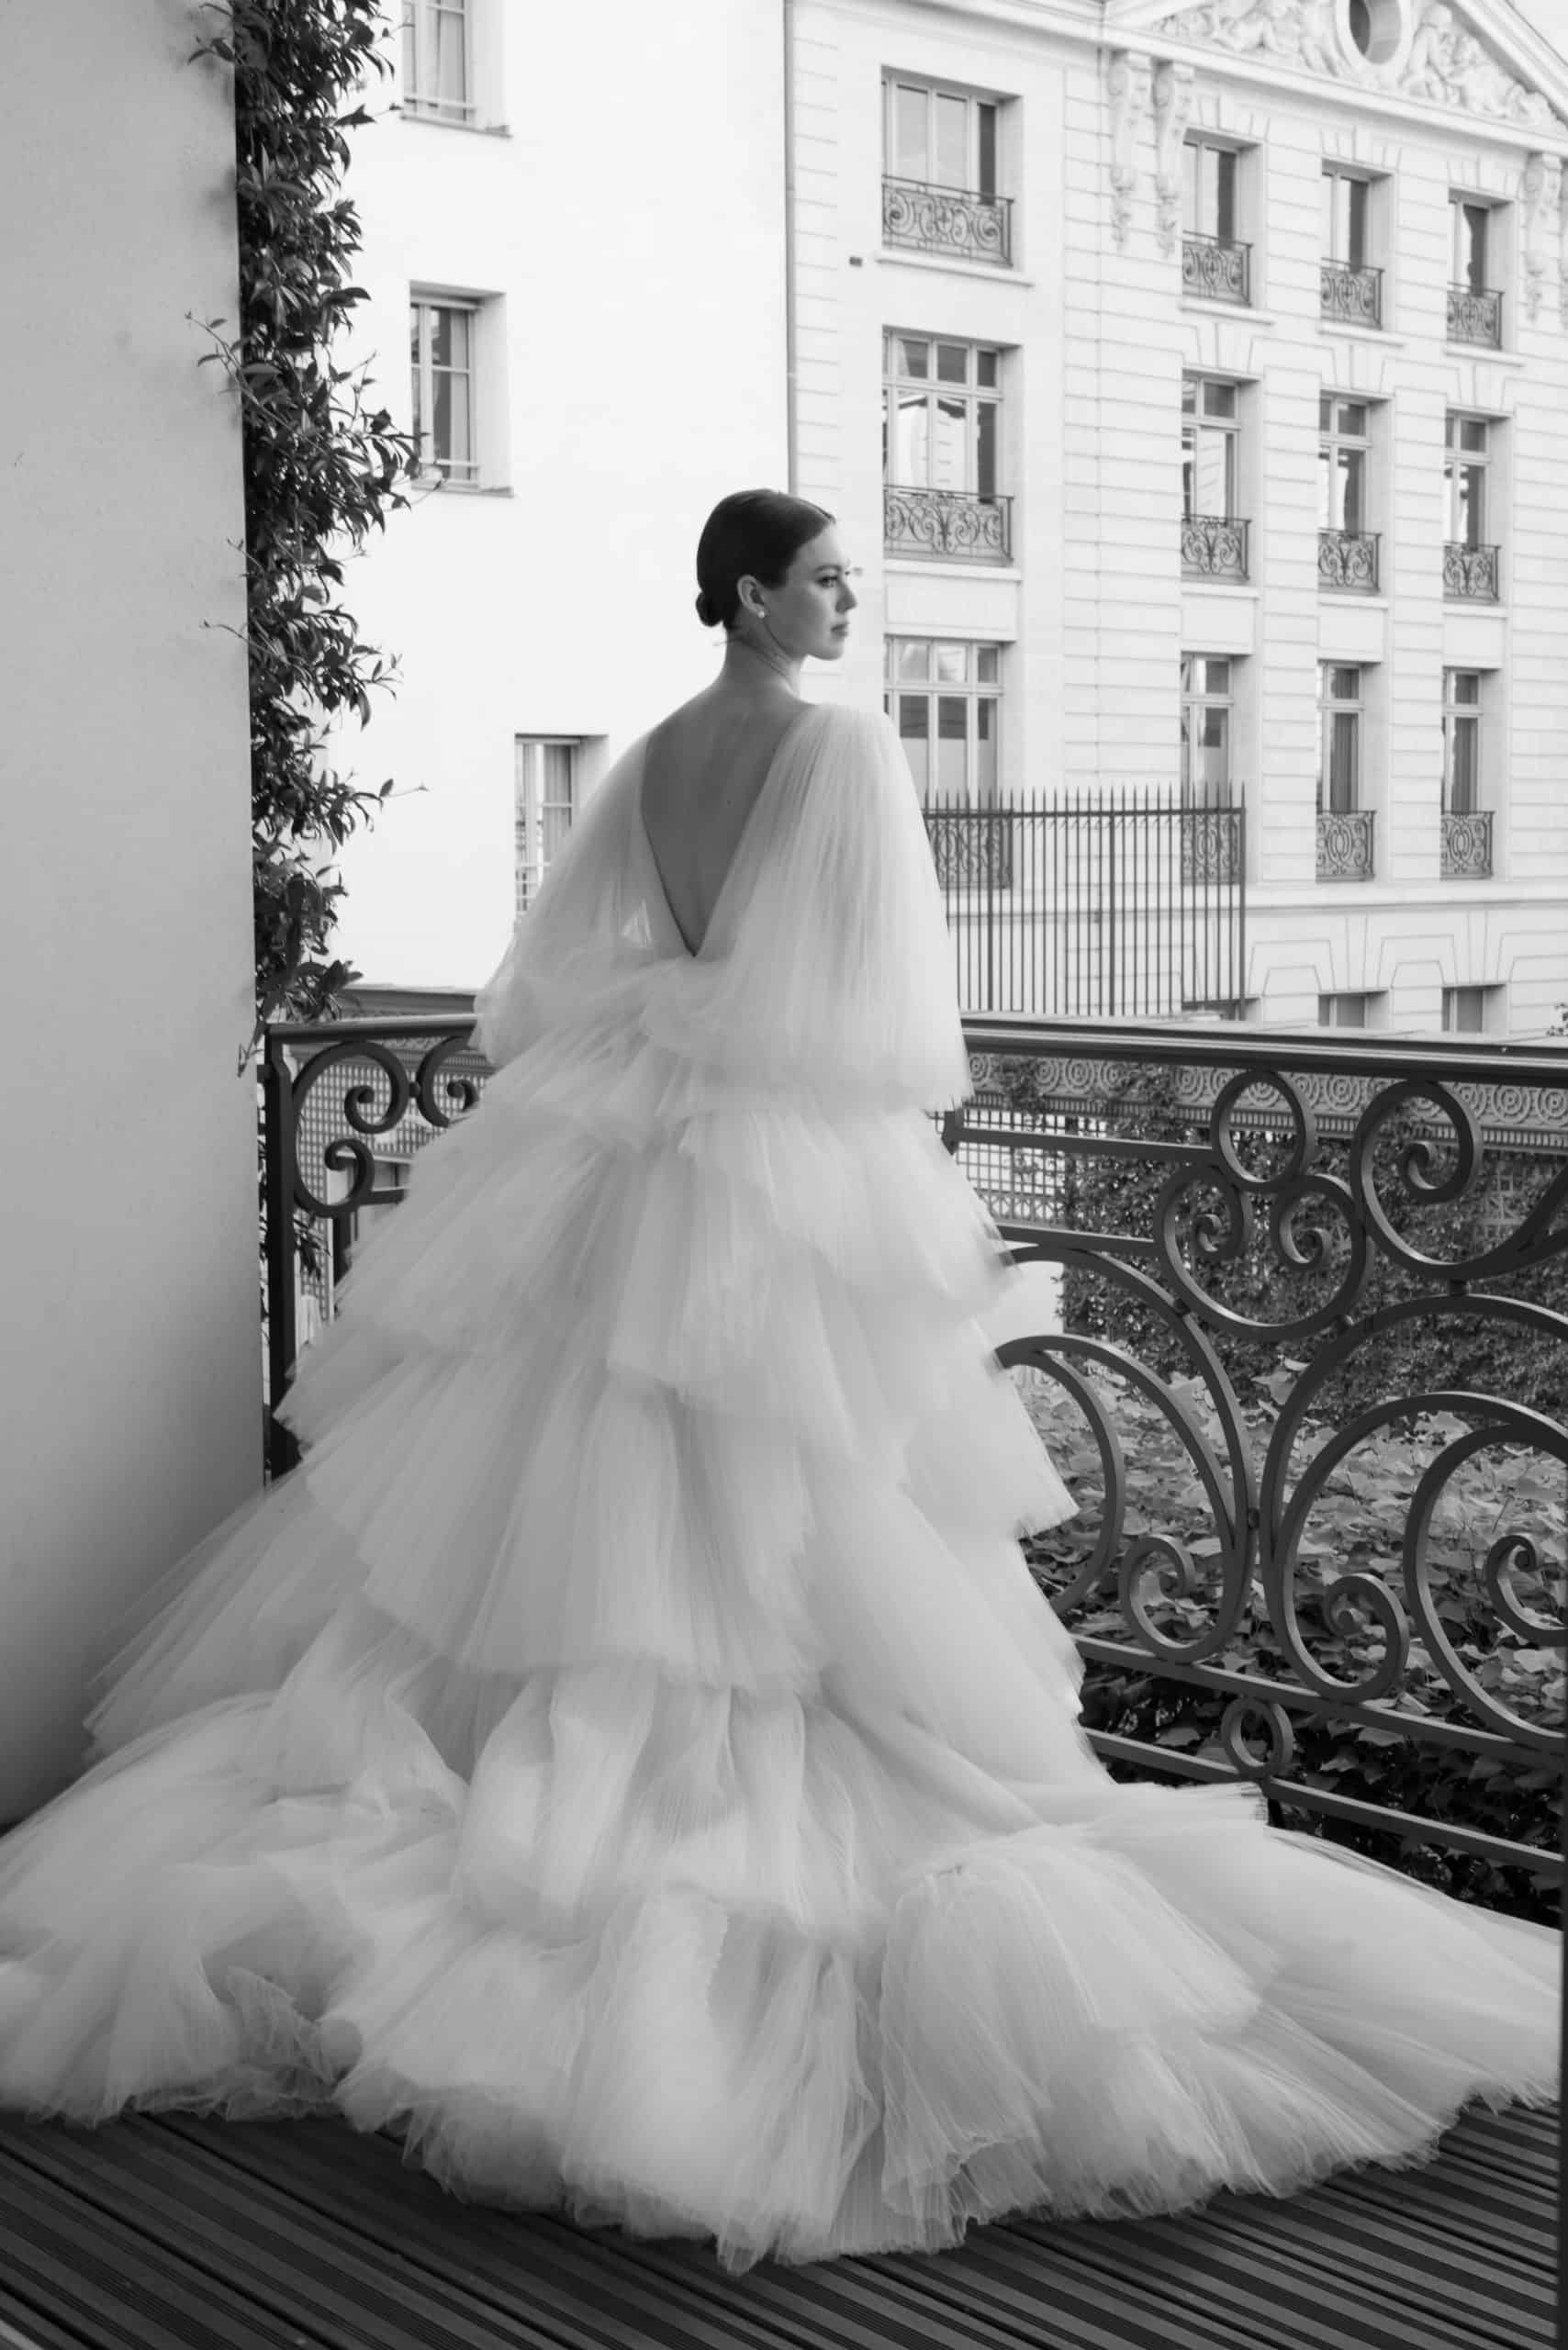 Ritz Paris Hotel Wedding Planning Guide - Theresa Kelly Photography